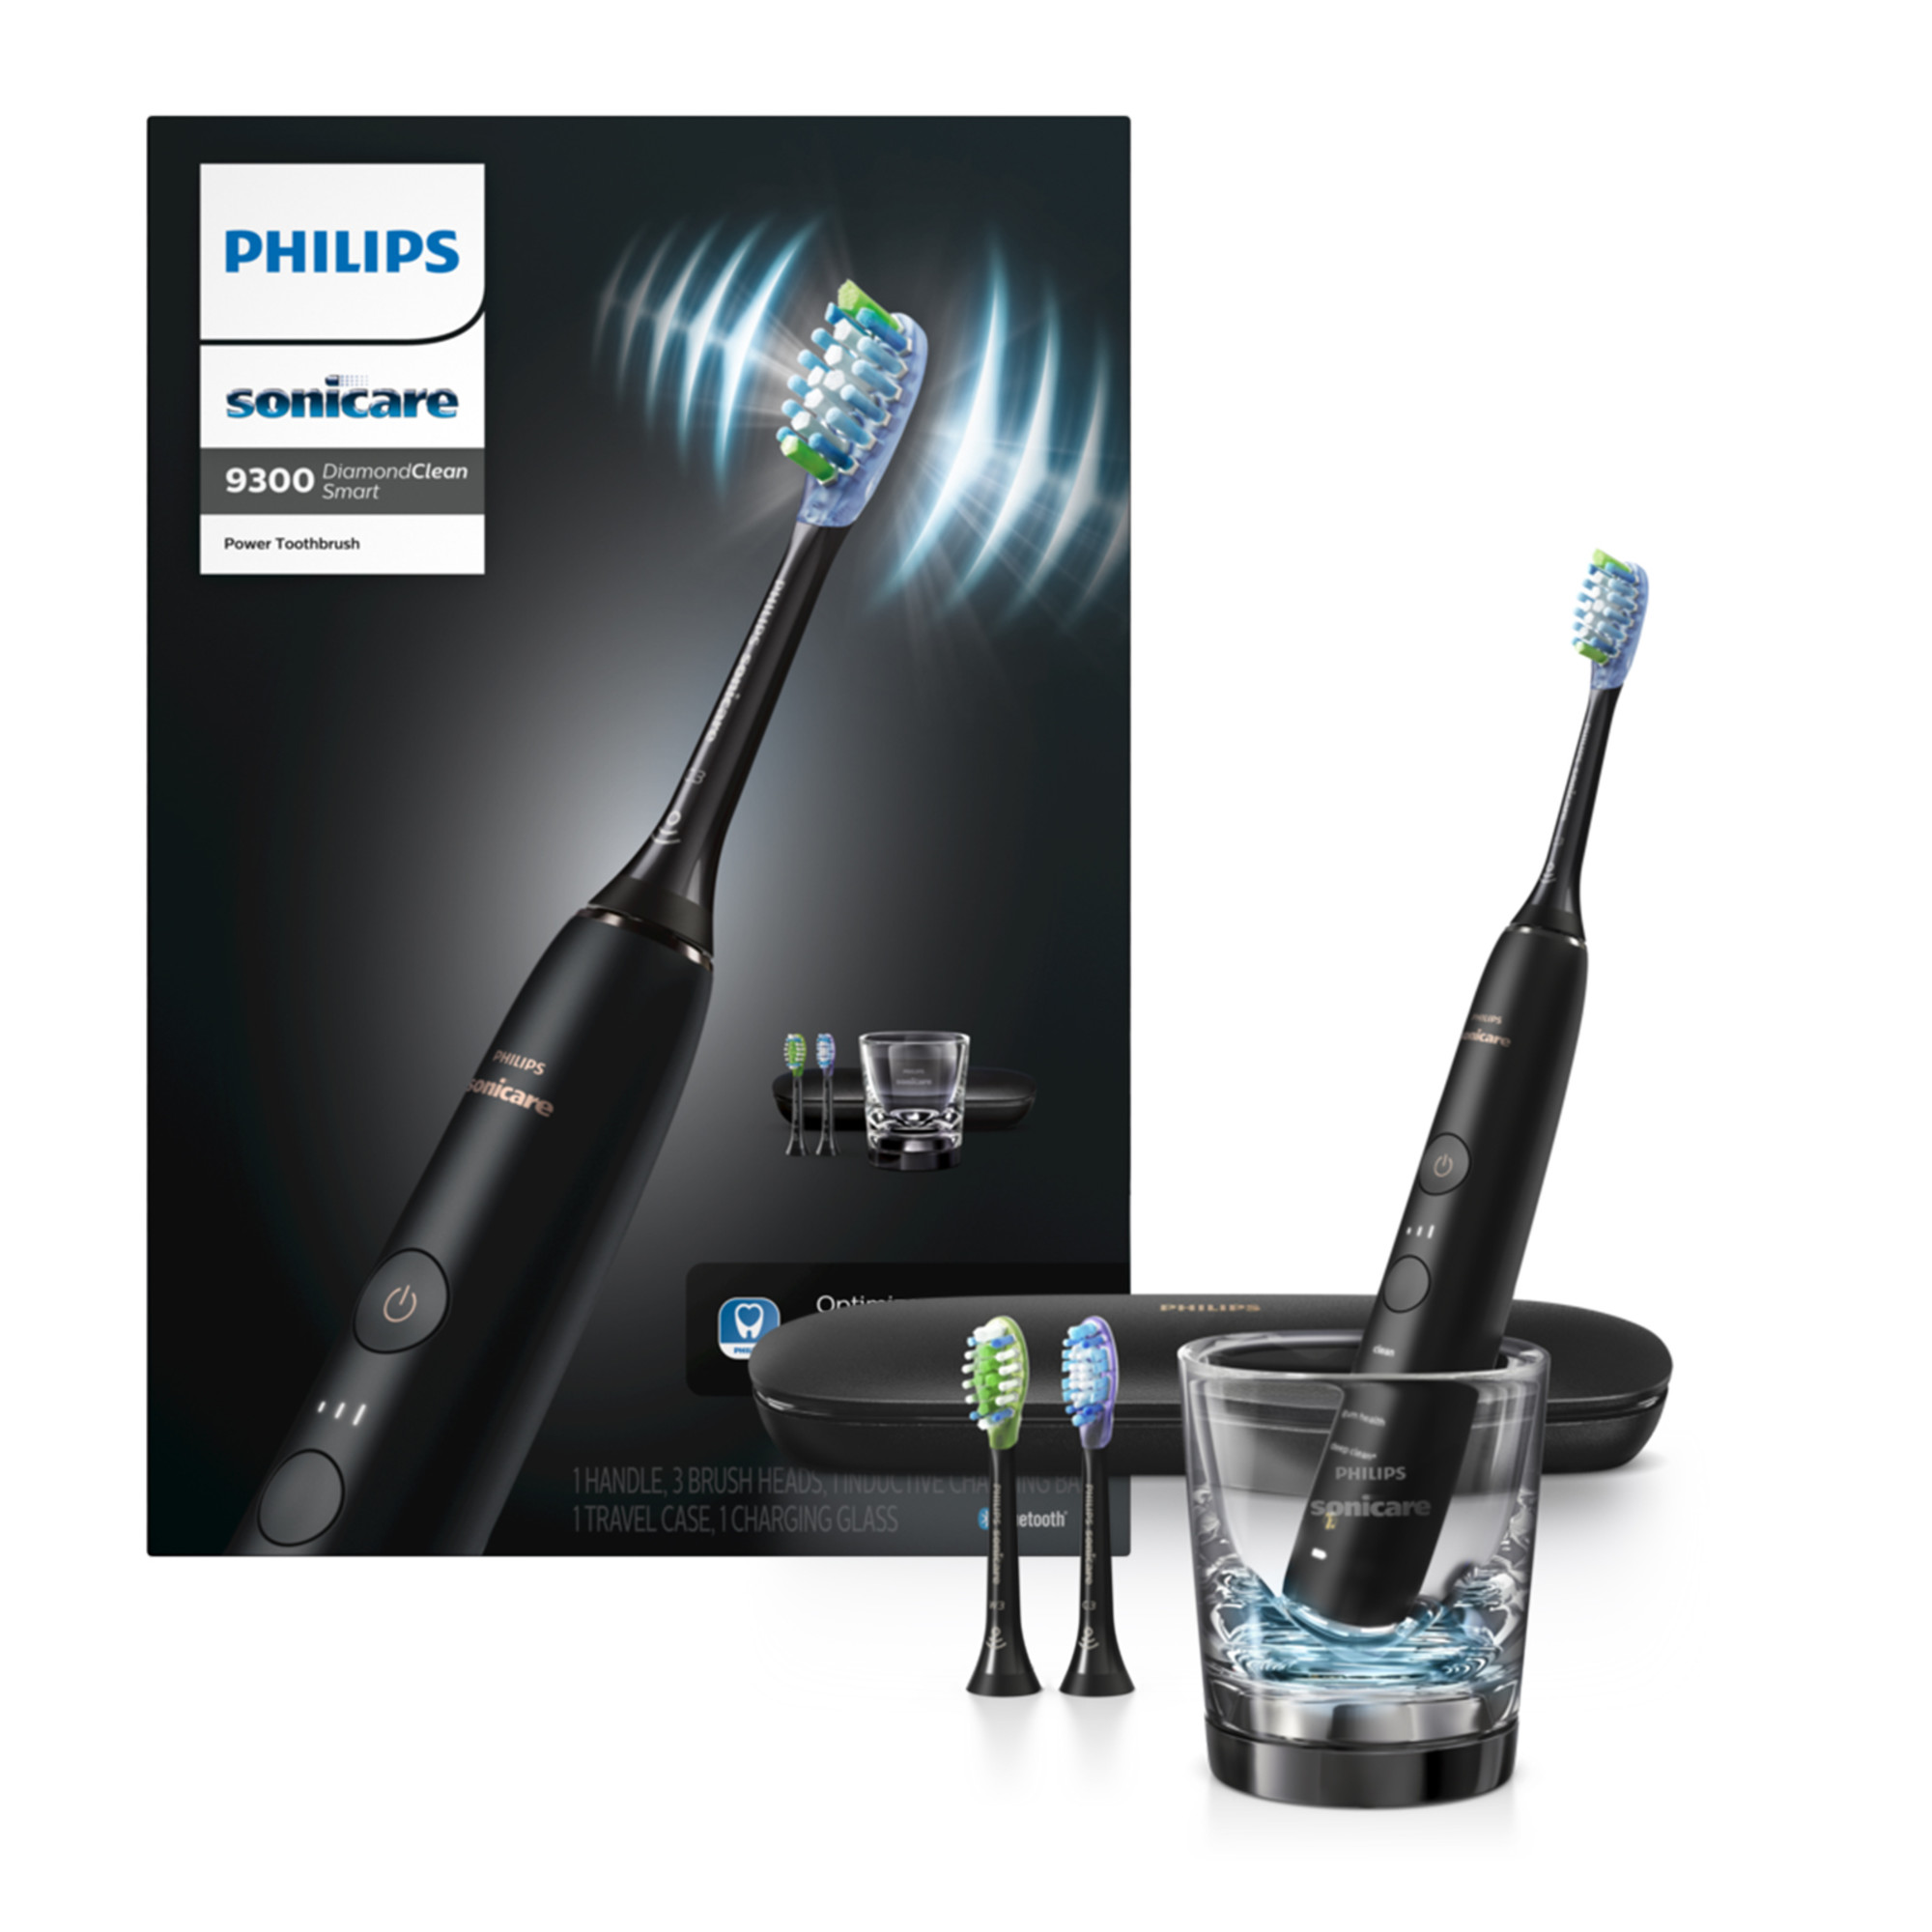 Philips Sonicare Diamondclean Smart Electric, Rechargeable Toothbrush For Complete Oral Care – 9300 Series, Black, HX9903/11 - image 1 of 31